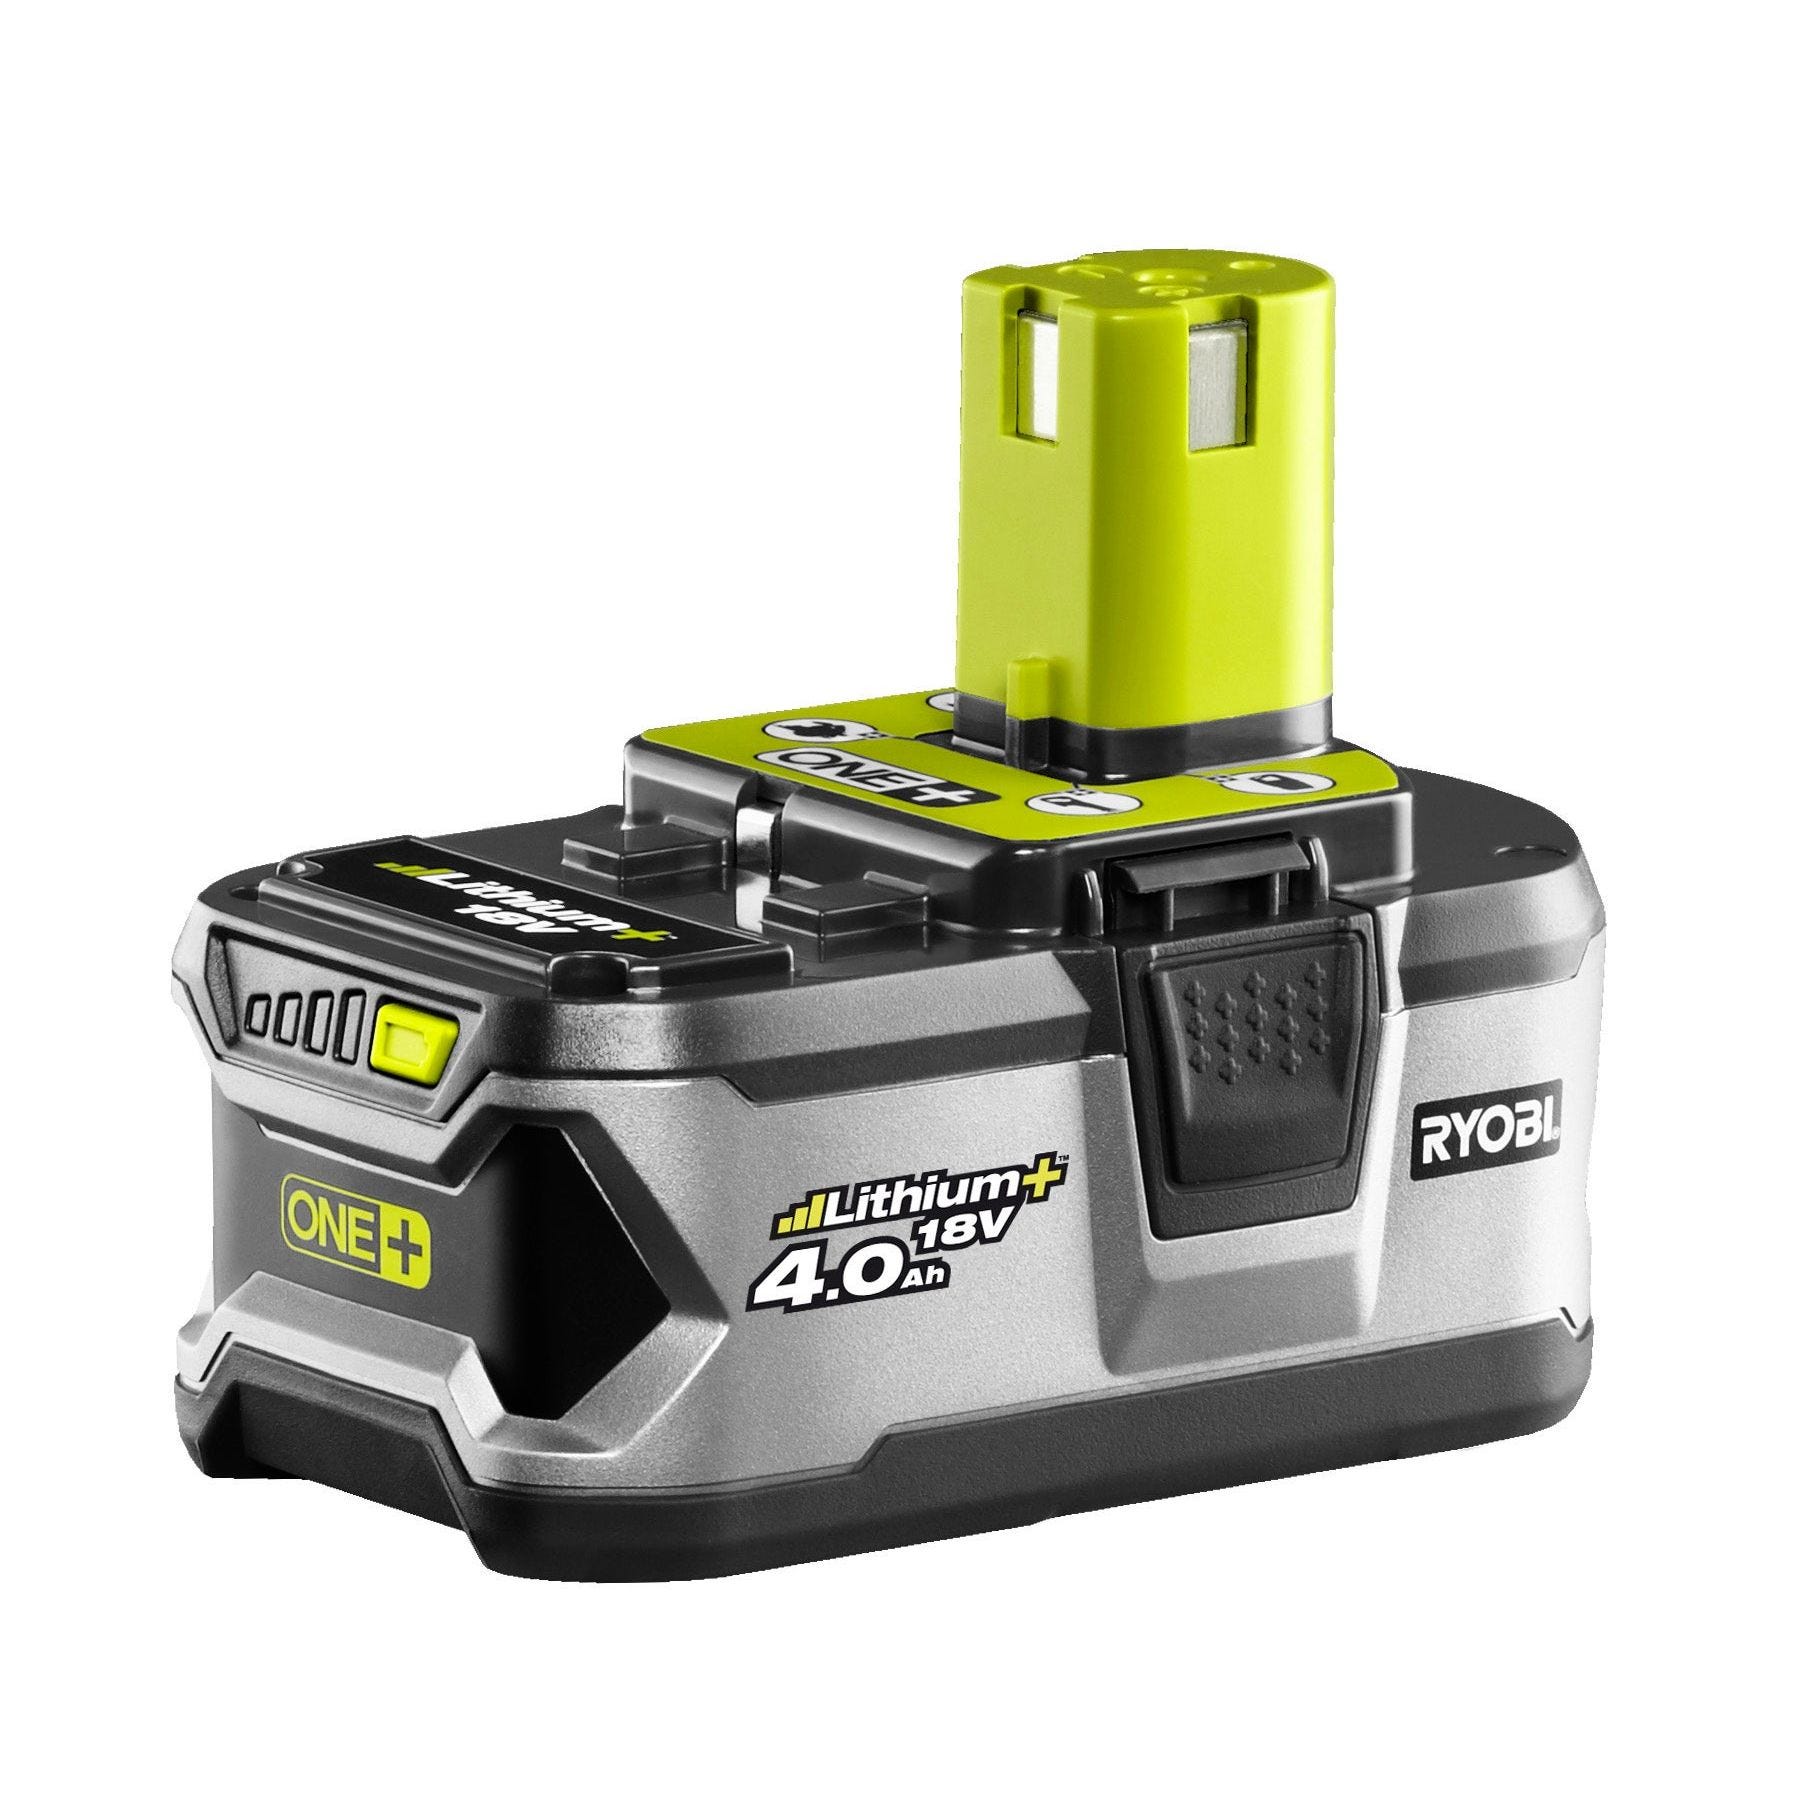 Pack 2 batteries RYOBI 18V One+ 4.0Ah - chargeur rapide 2.0Ah Lithium-ion RC18120-240 2